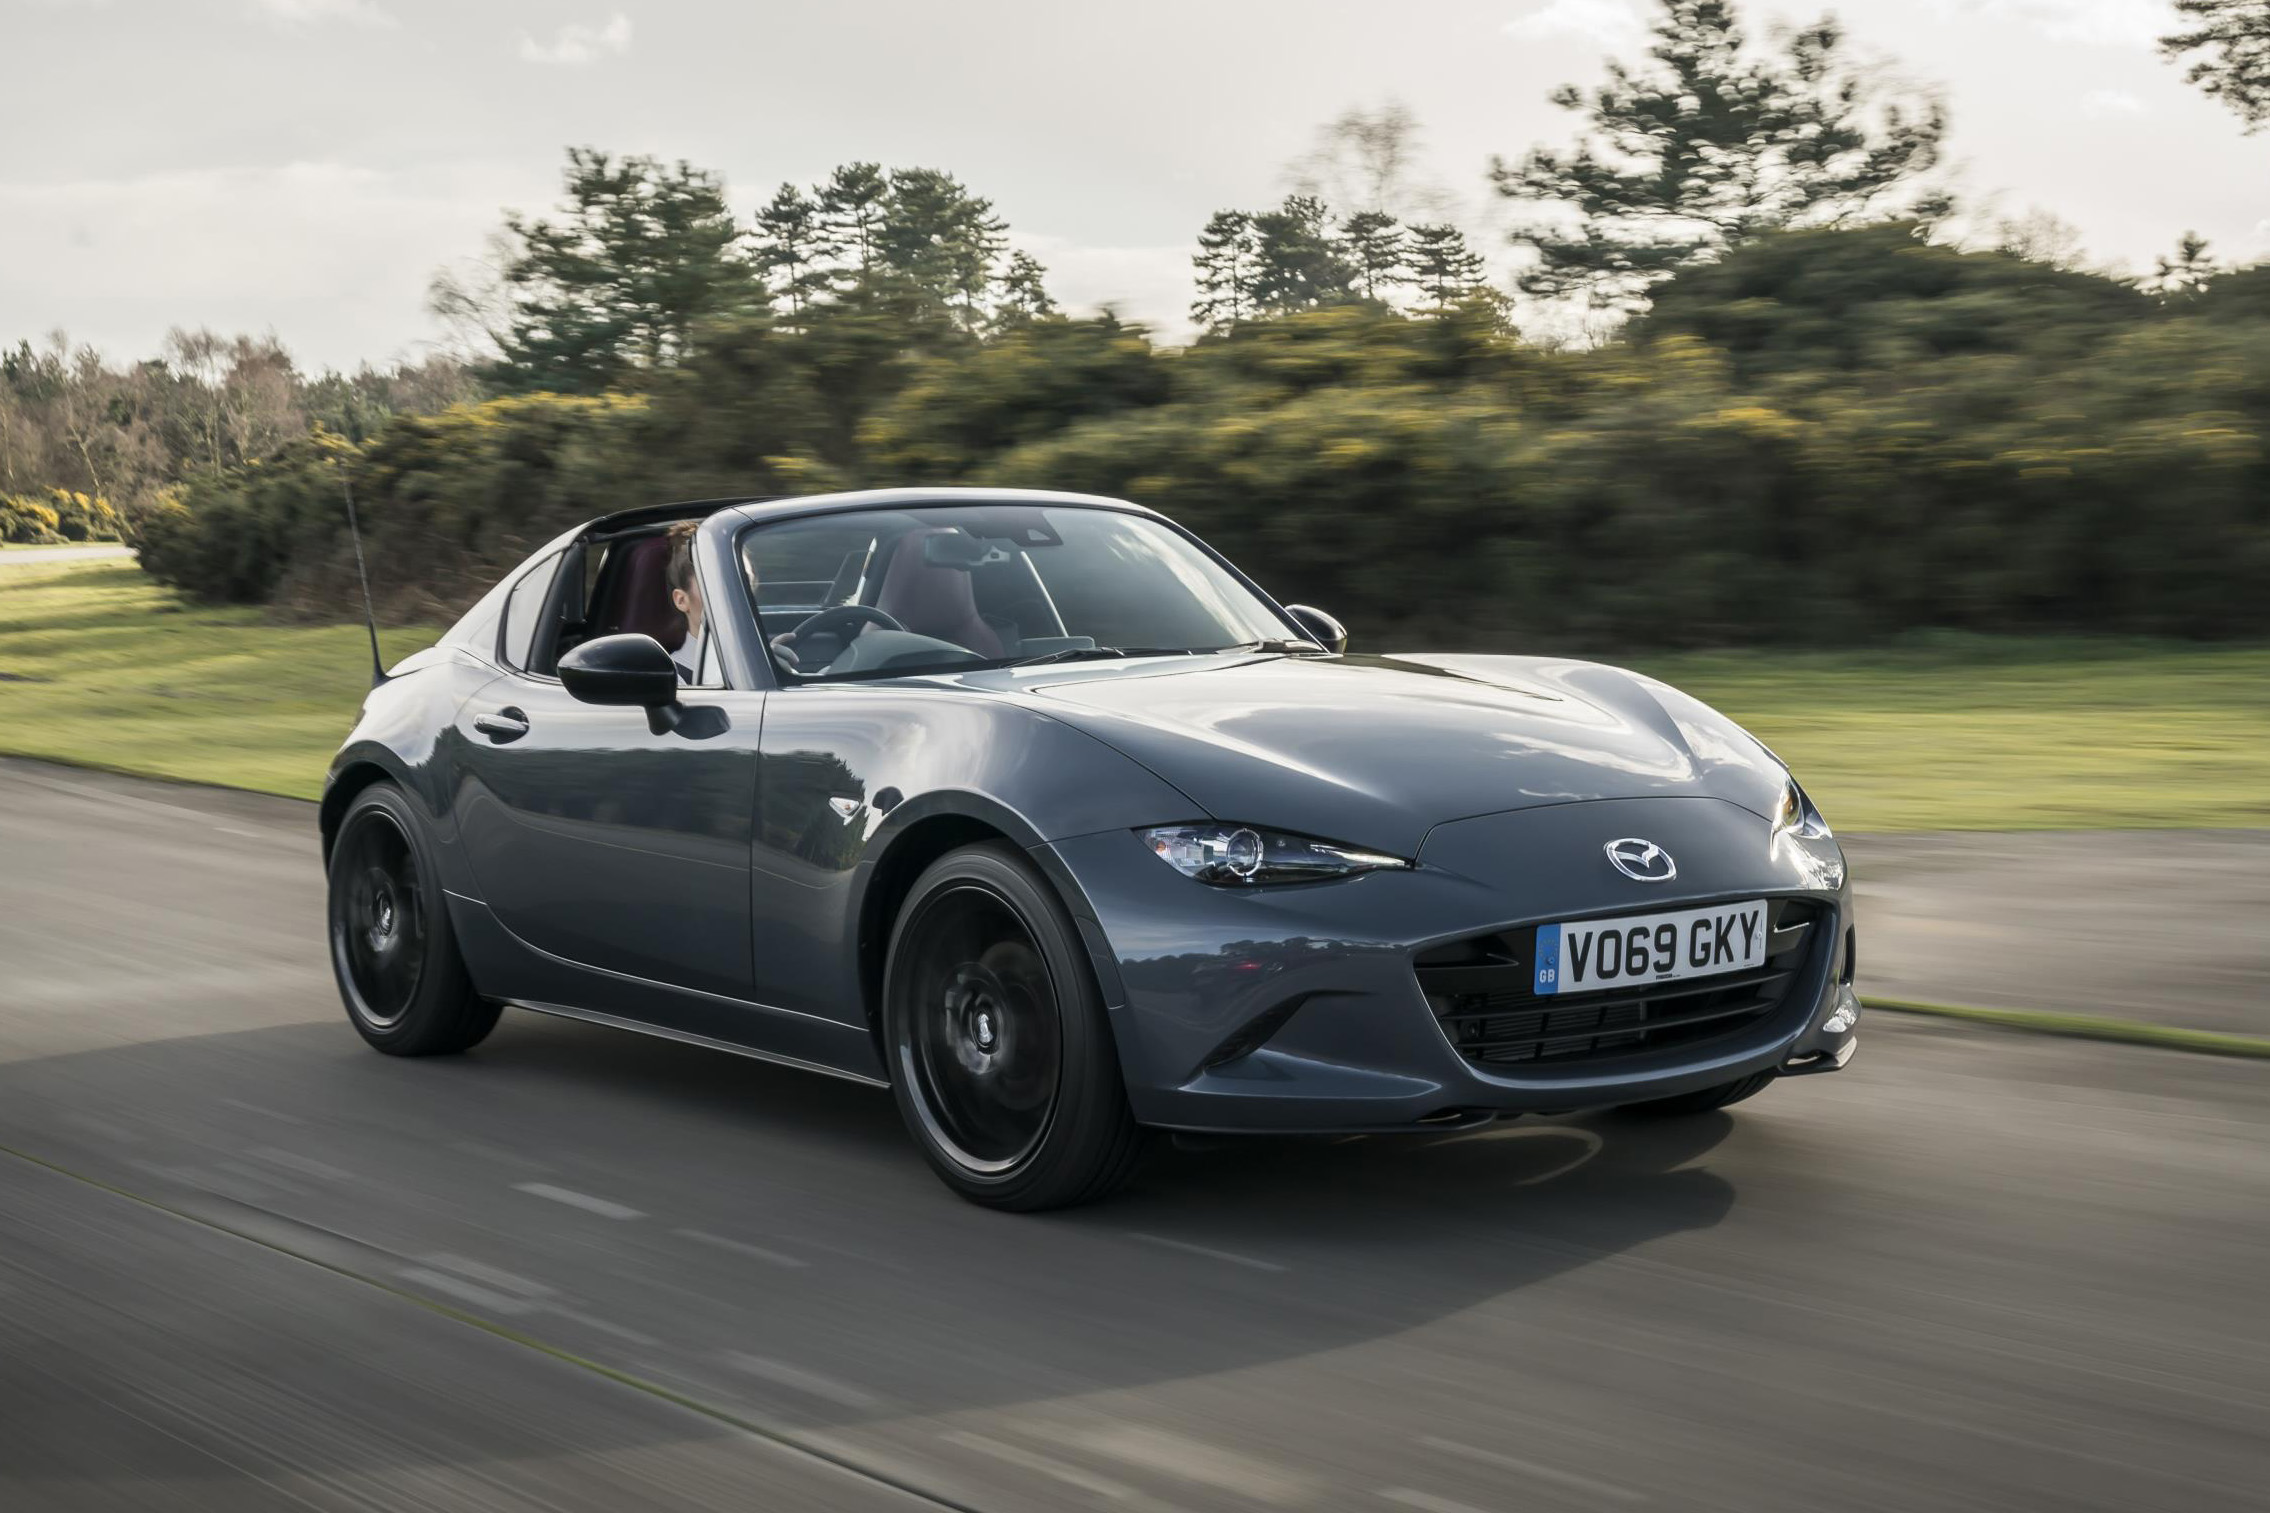 Updated 2020 Mazda MX5 on sale now priced from £23,795